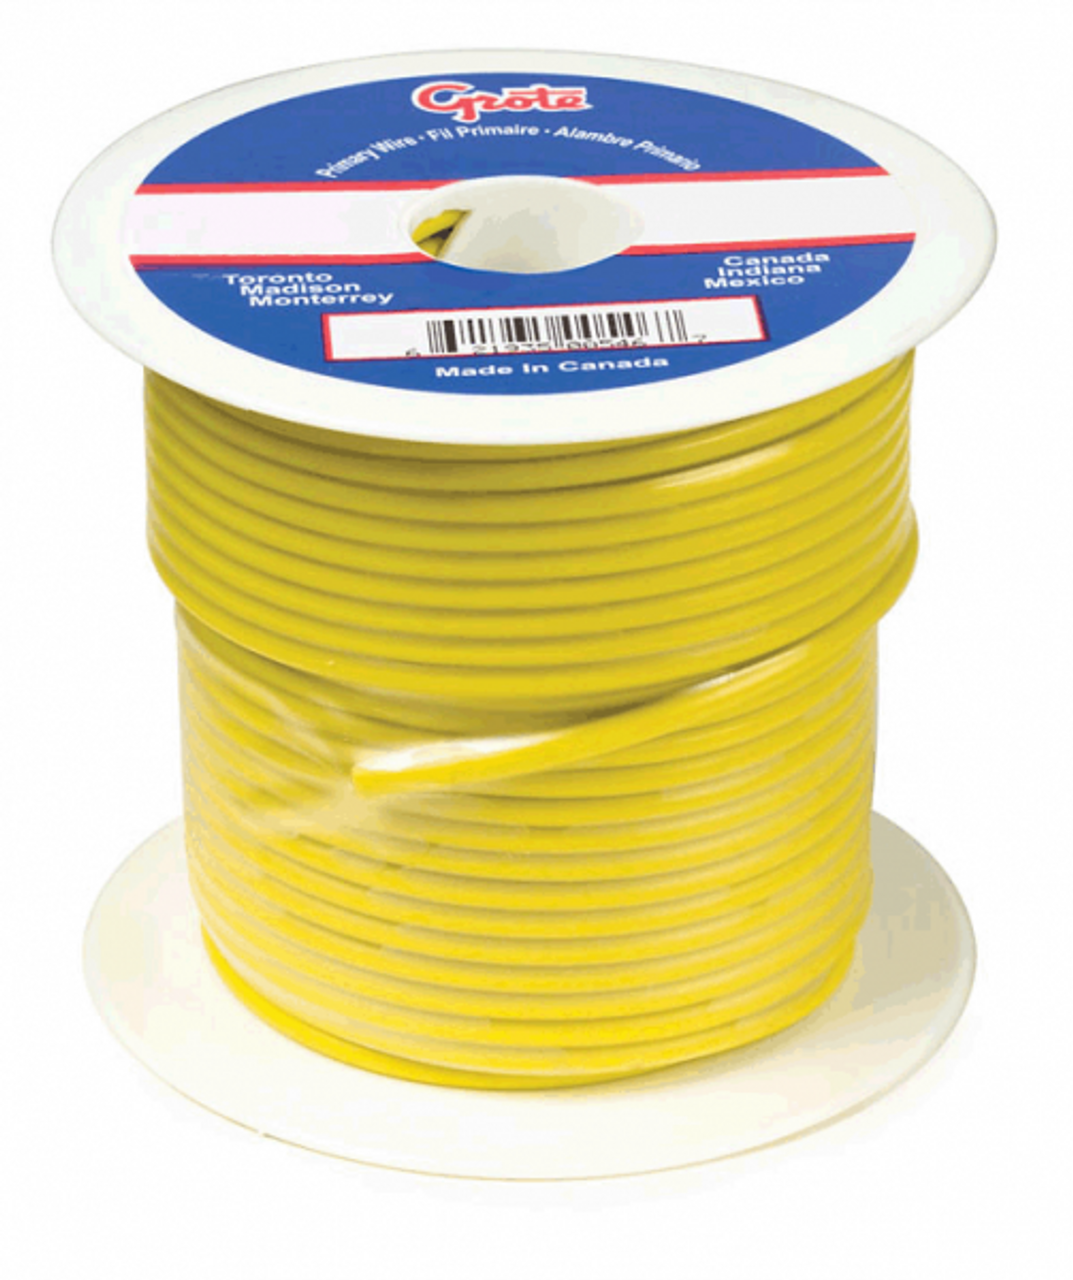 Grote 89-8011 Primary Wire- 16 GA, 25'- Yellow